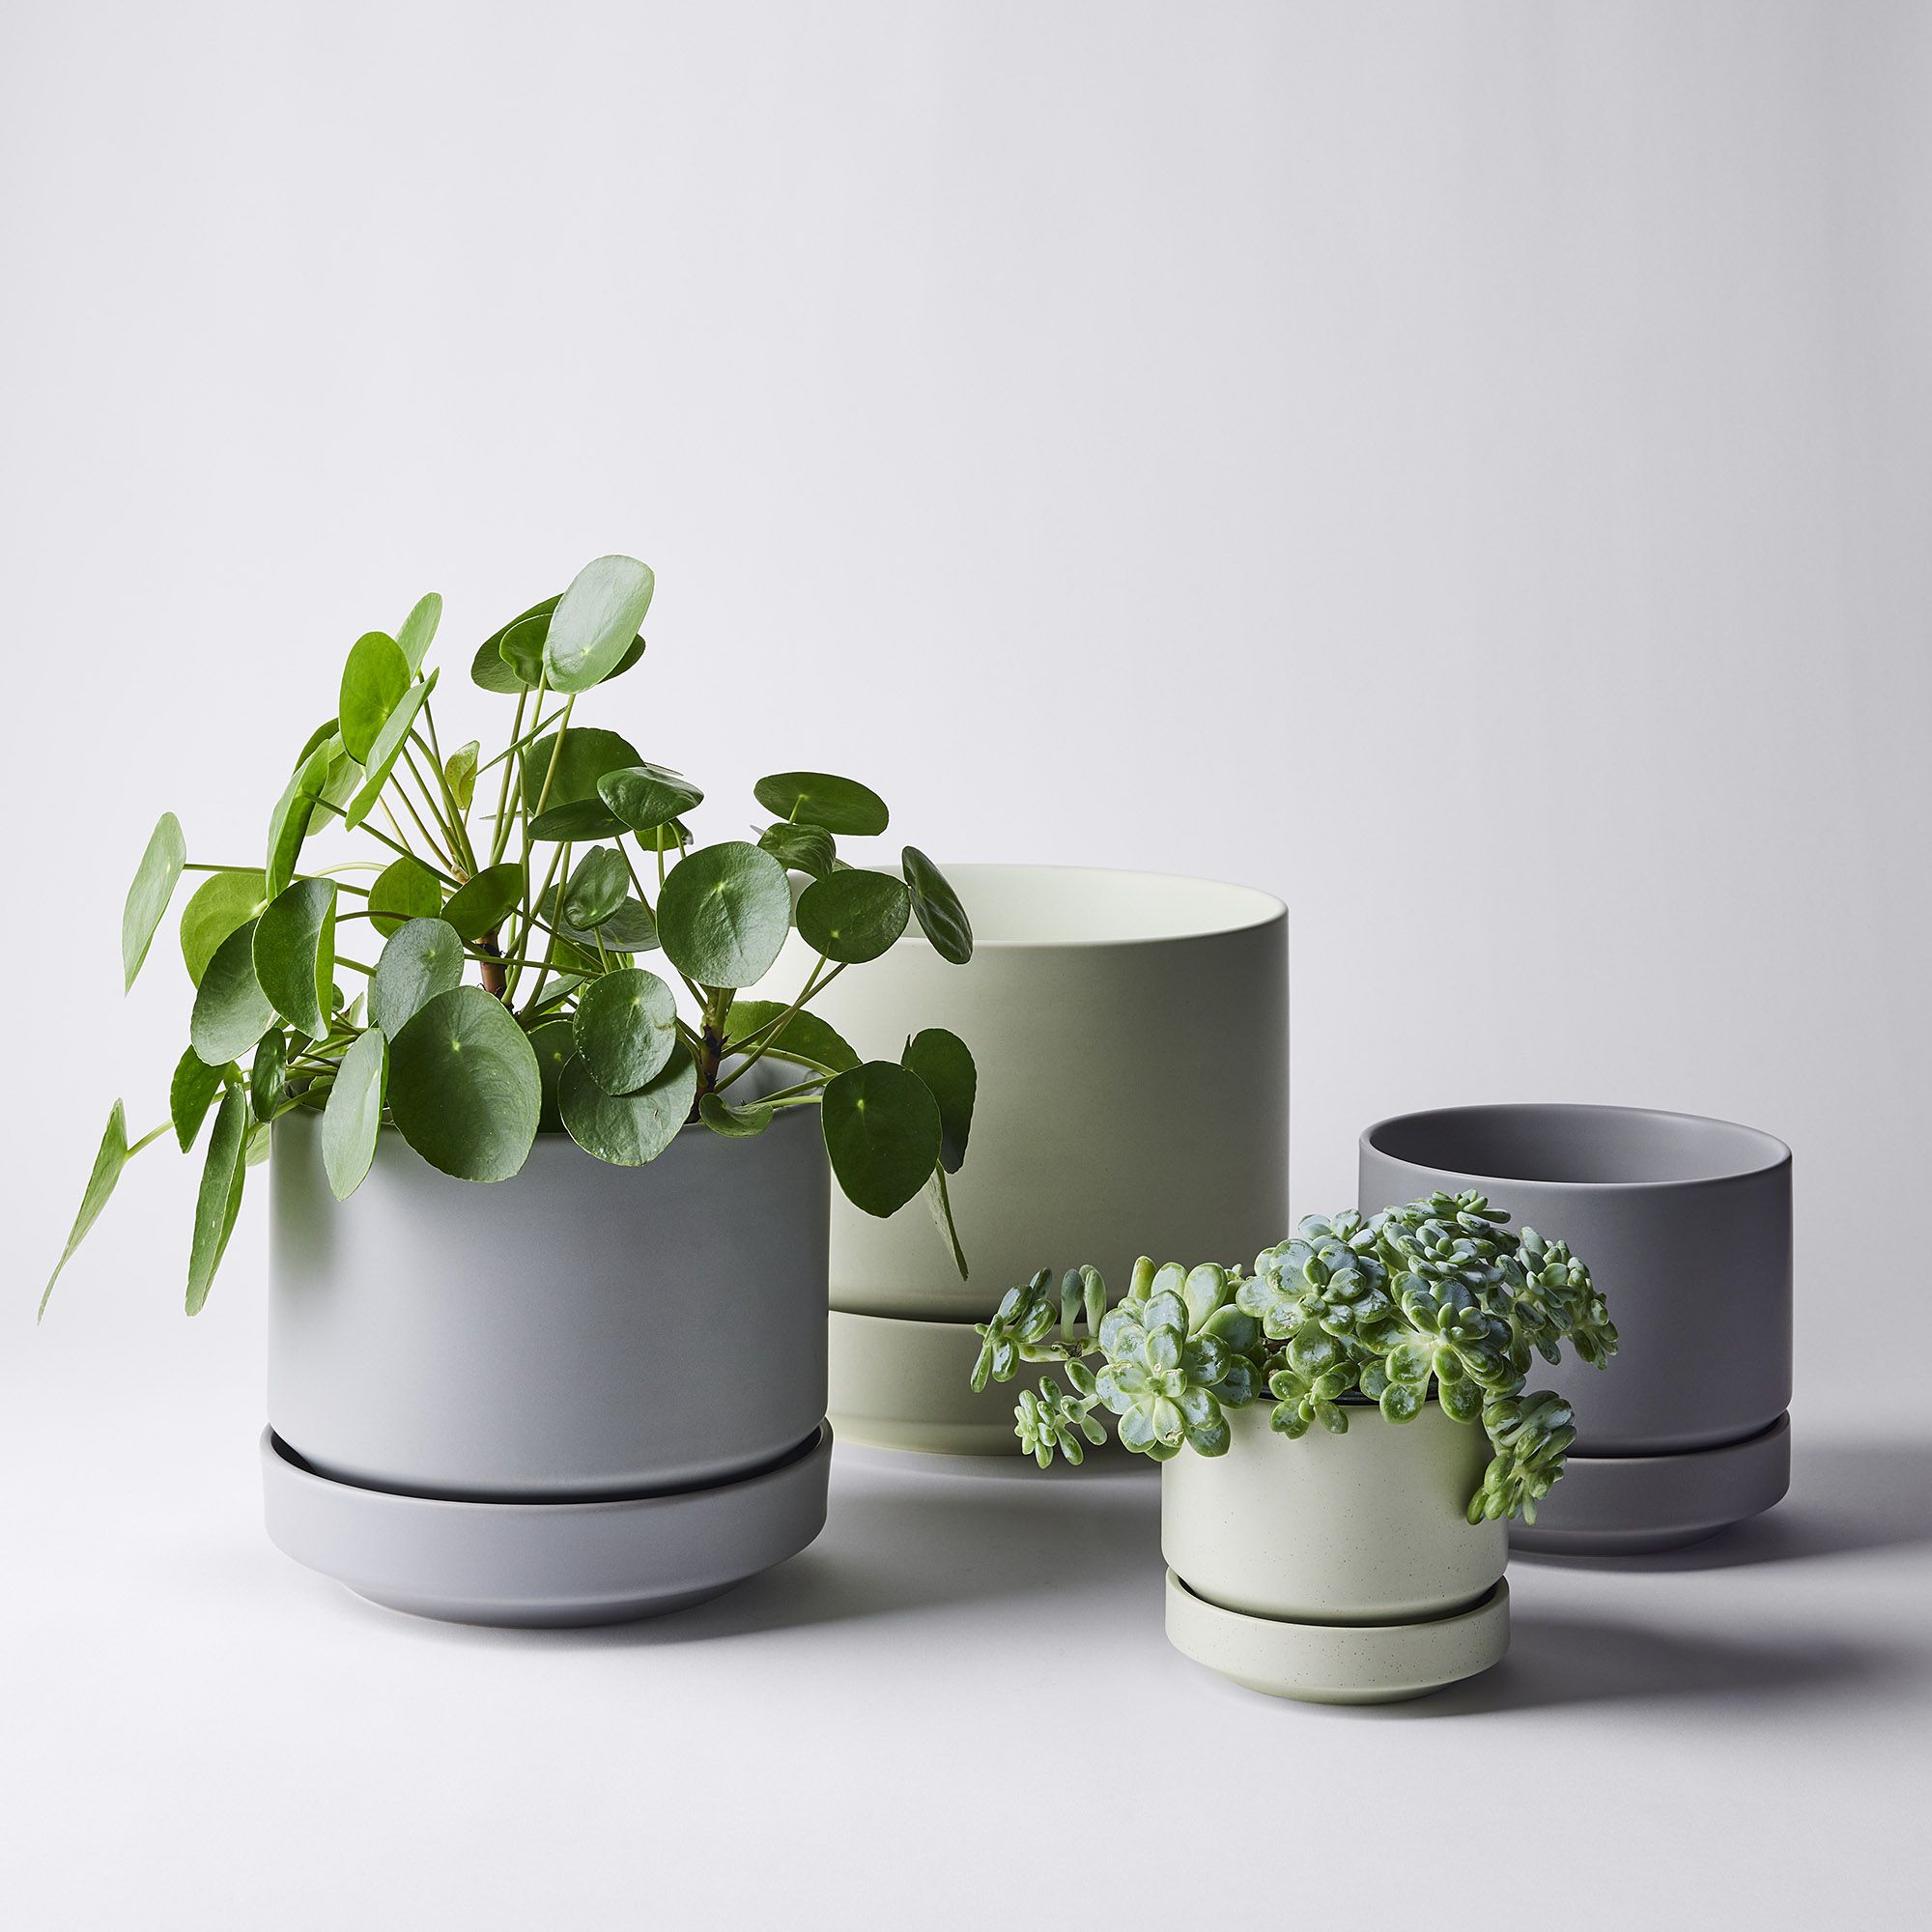 High-Fired Stoneware on Food52 Planters